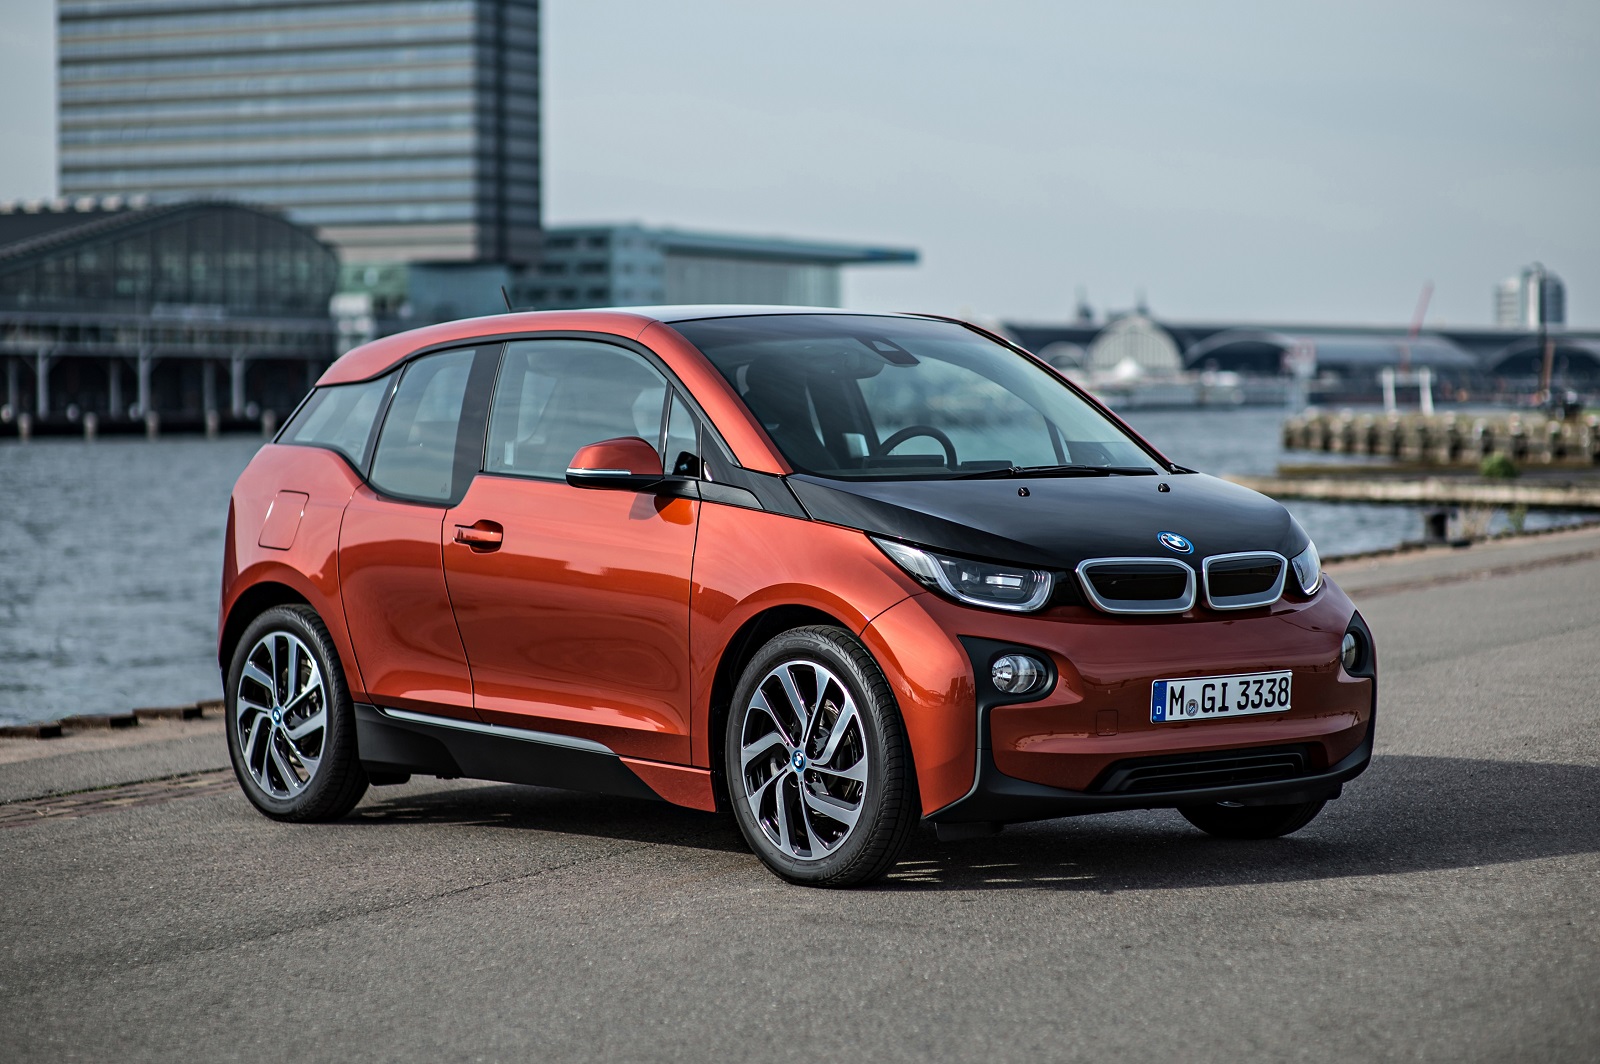 BMW i3 Electric Car To Get Longer Range Next Year, CEO Says